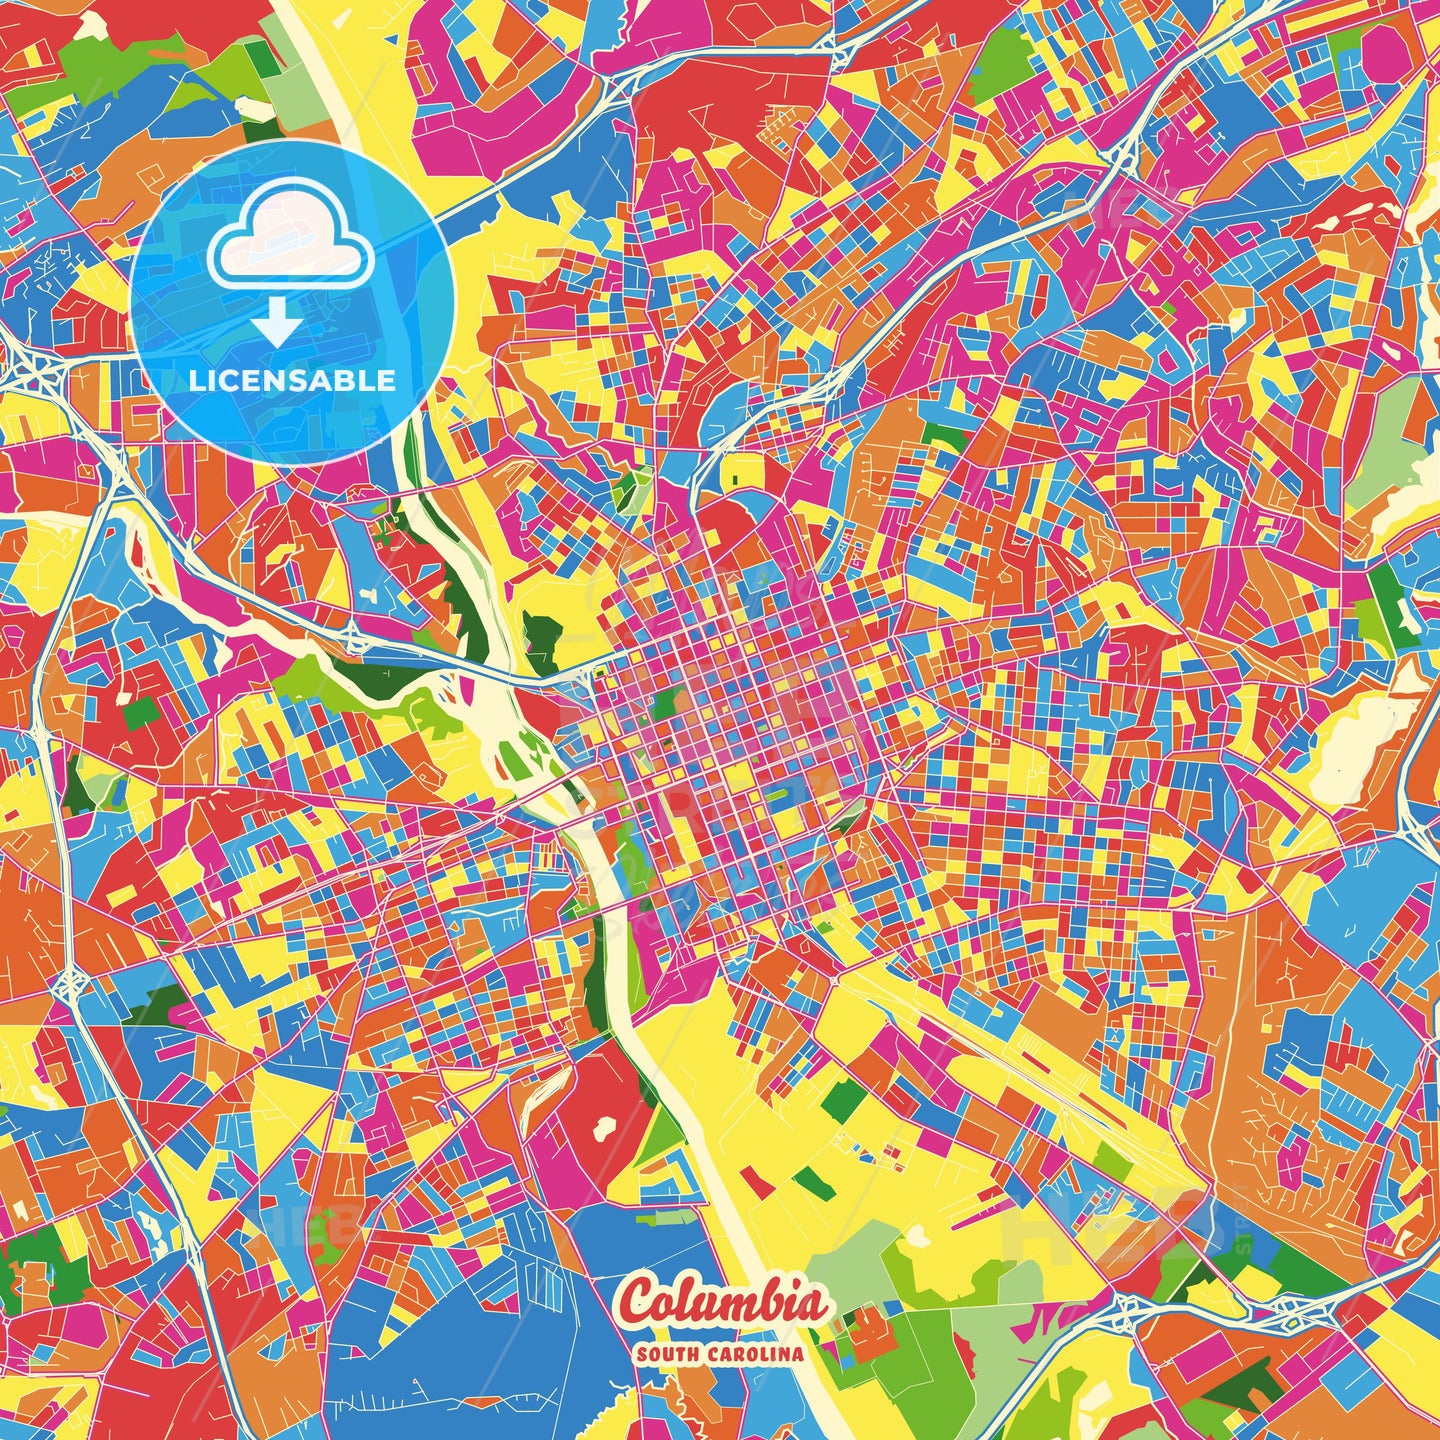 Columbia, United States Crazy Colorful Street Map Poster Template - HEBSTREITS Sketches